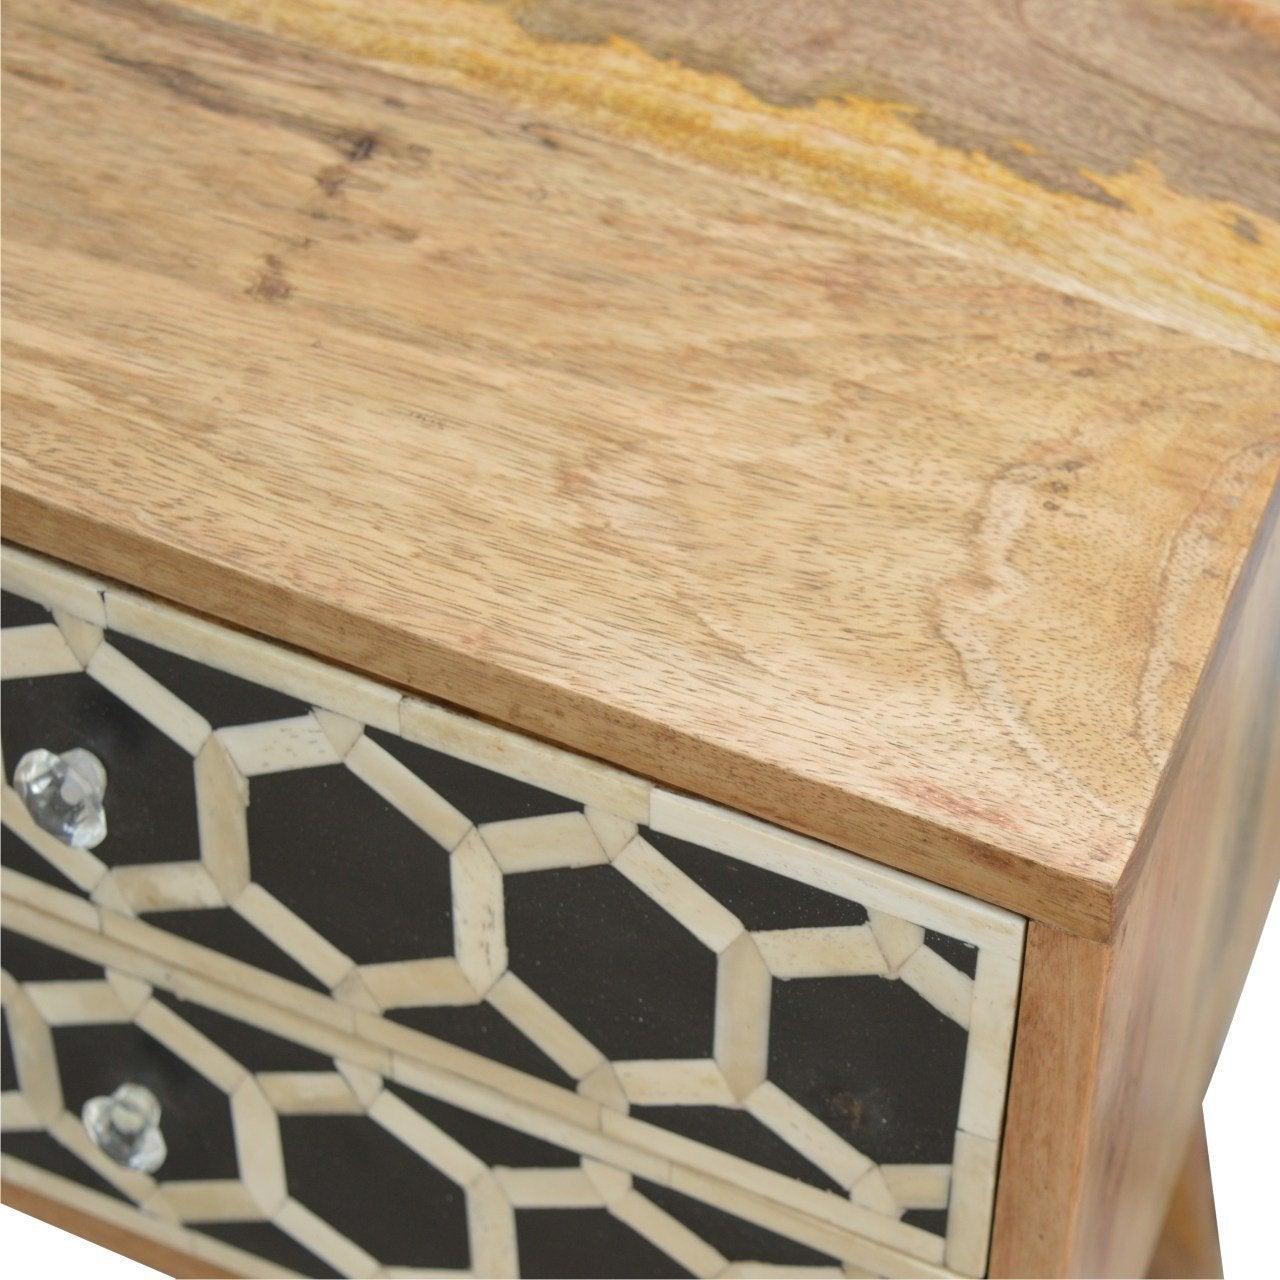 Bone inlay bedside table with 2 drawers - crimblefest furniture - image 5